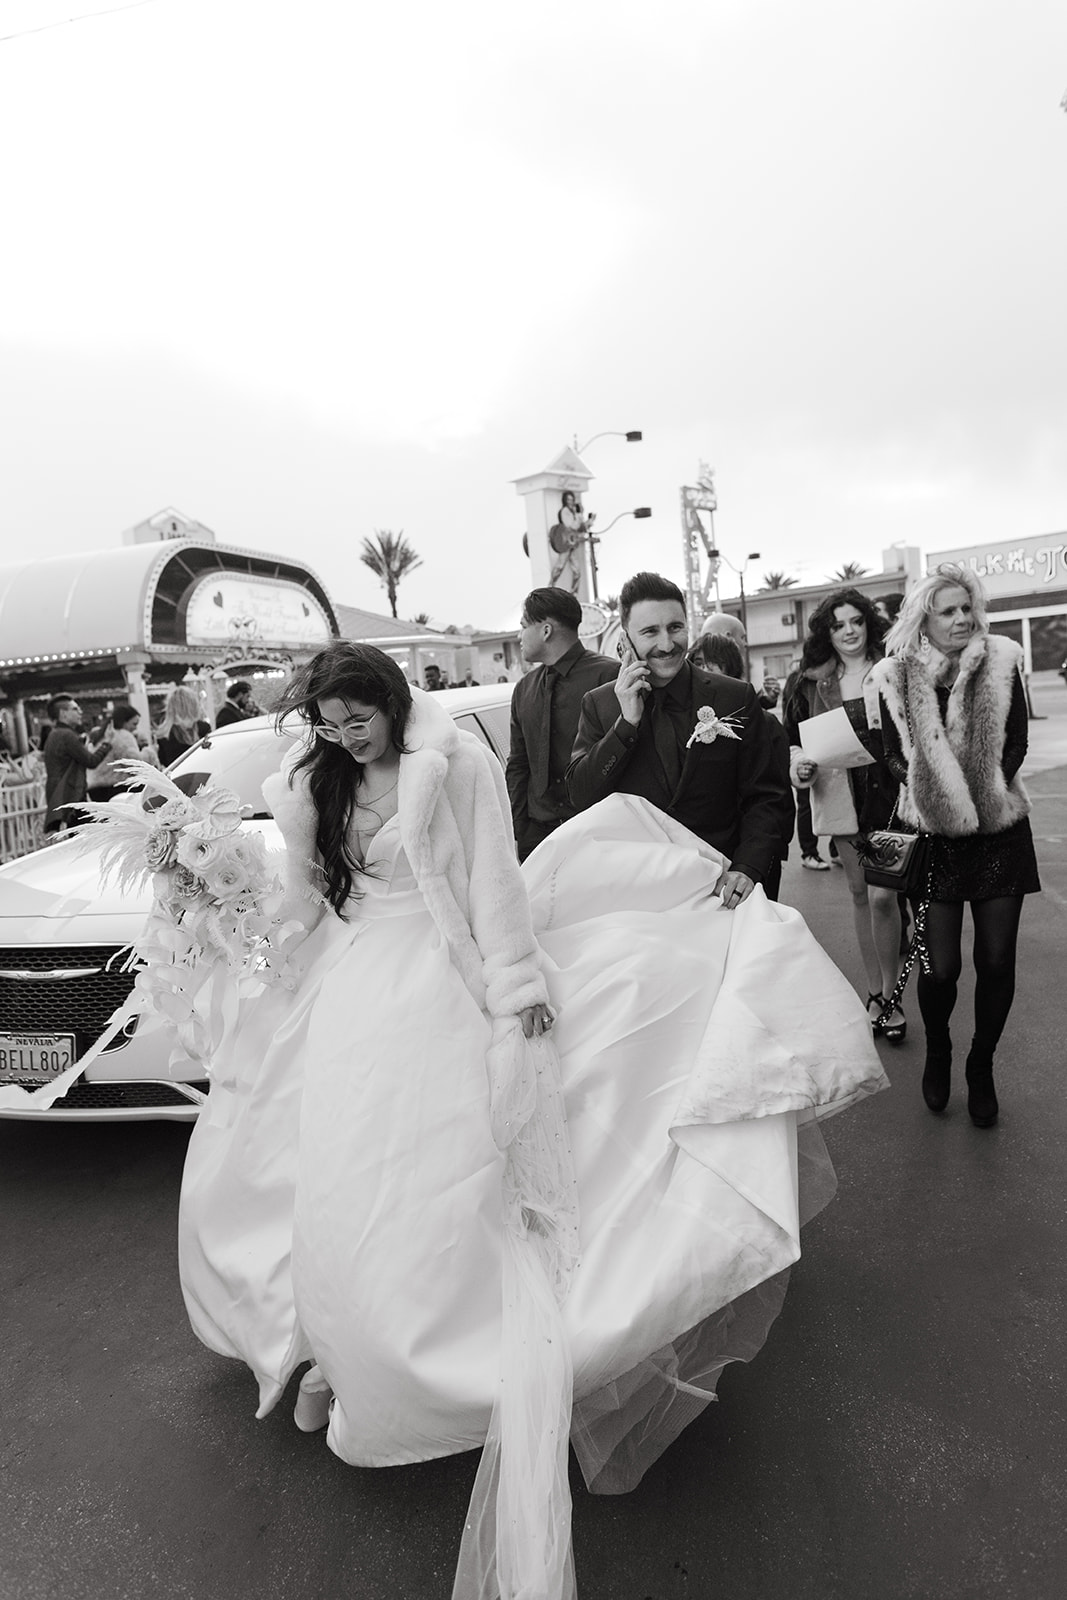 Black and White Photo of Bride and Groom Leaving Vegas Ceremony with Guests Following Behind 